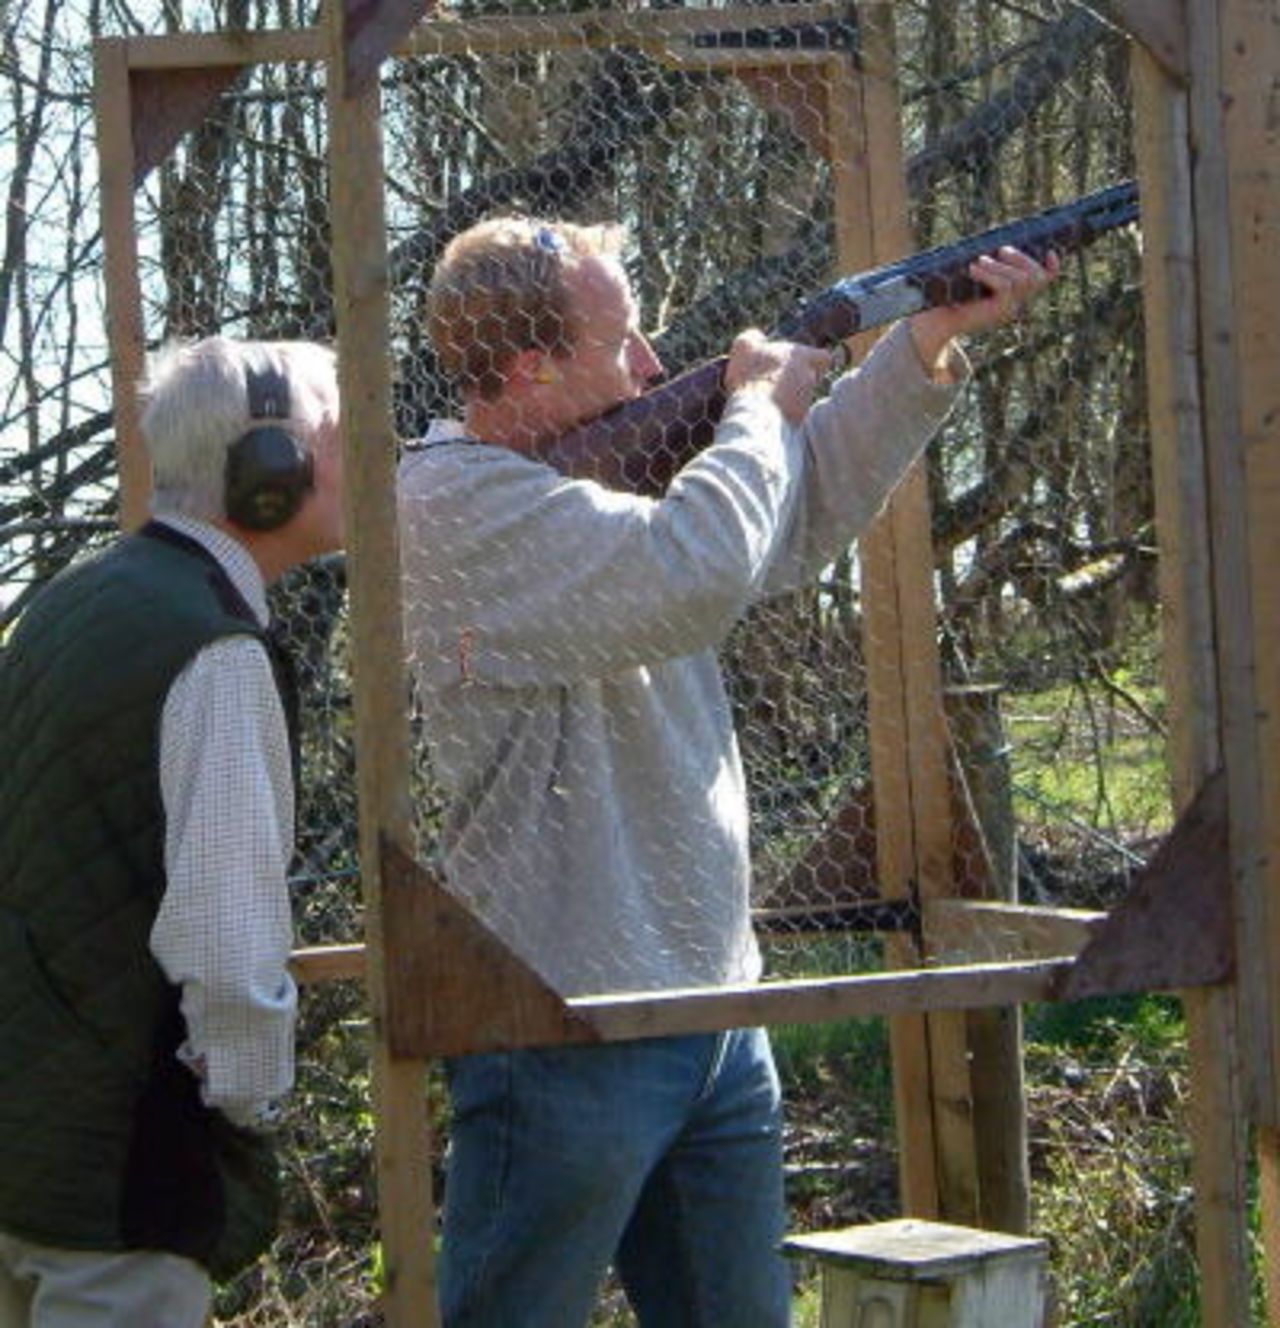 Will Kendall in action as Hampshire players take on clay pigeon shooting